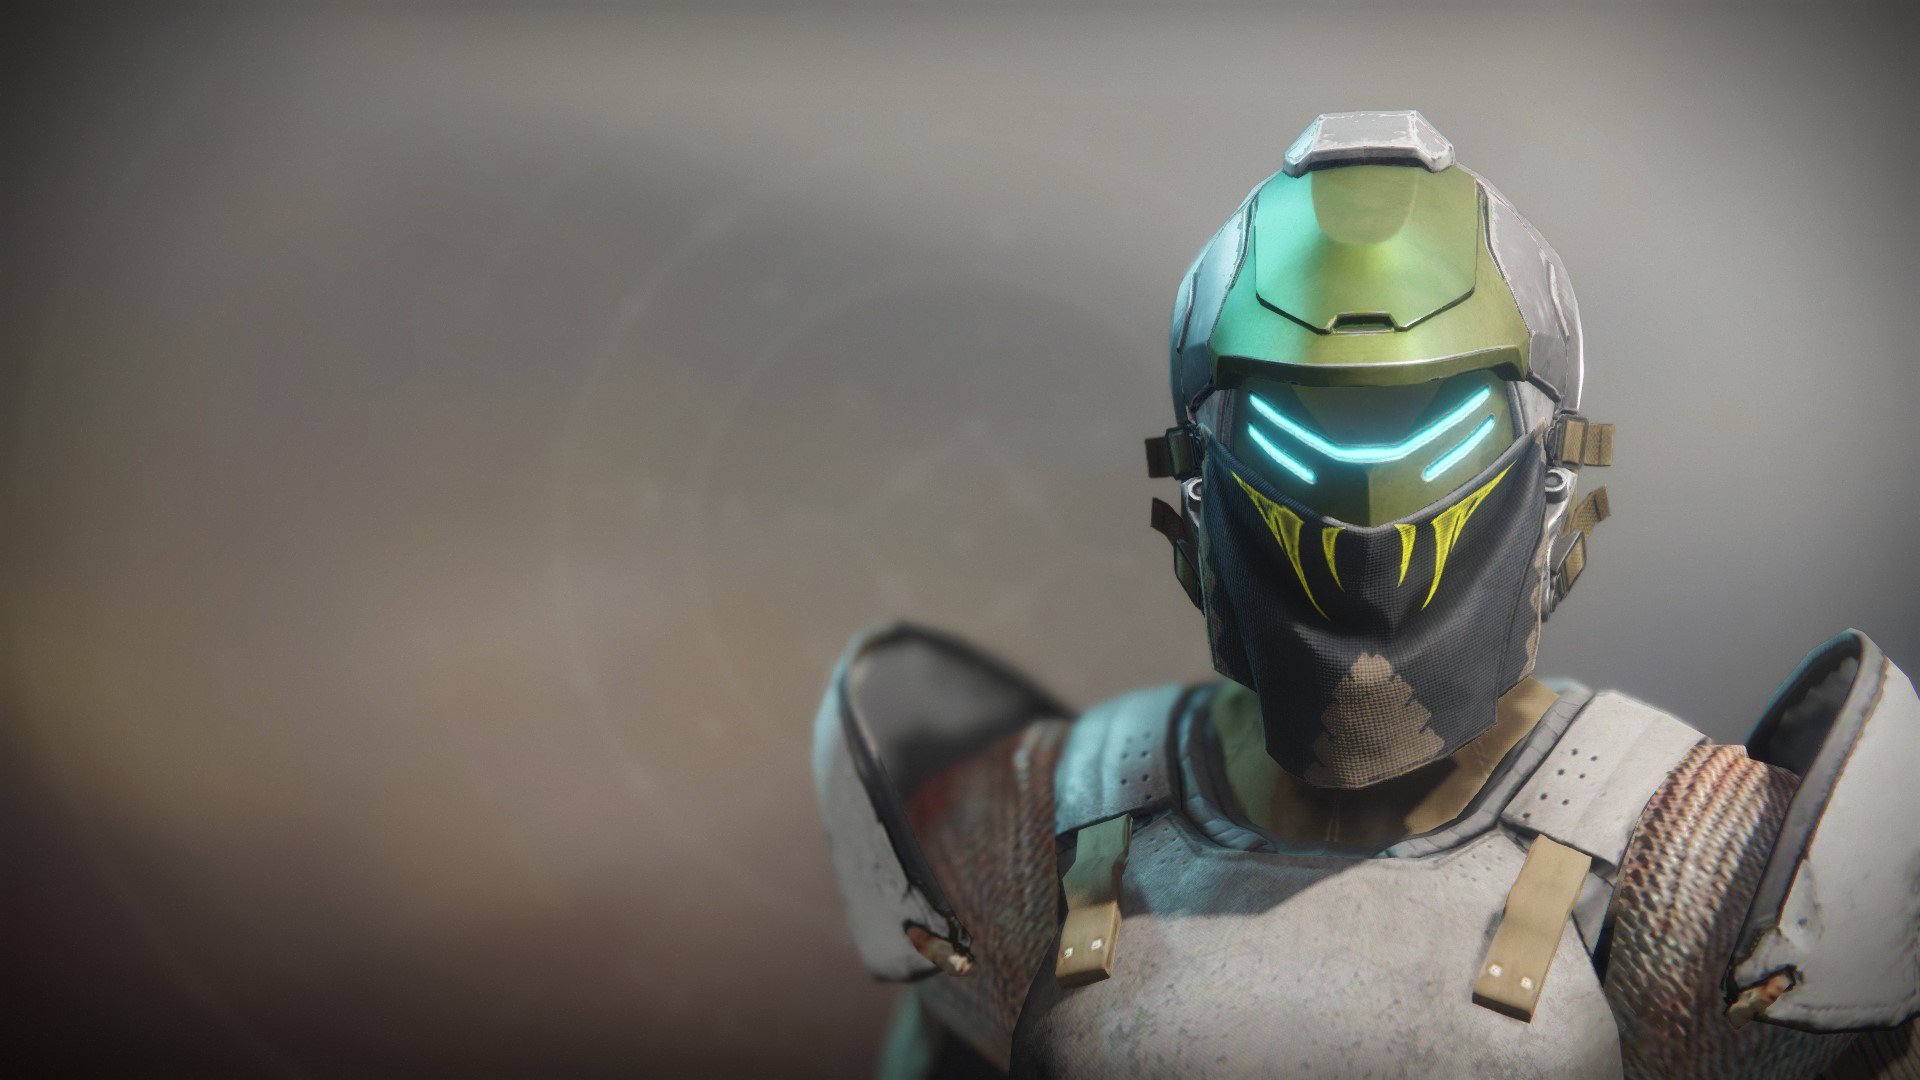 An in-game render of the Notorious Sentry Helm.